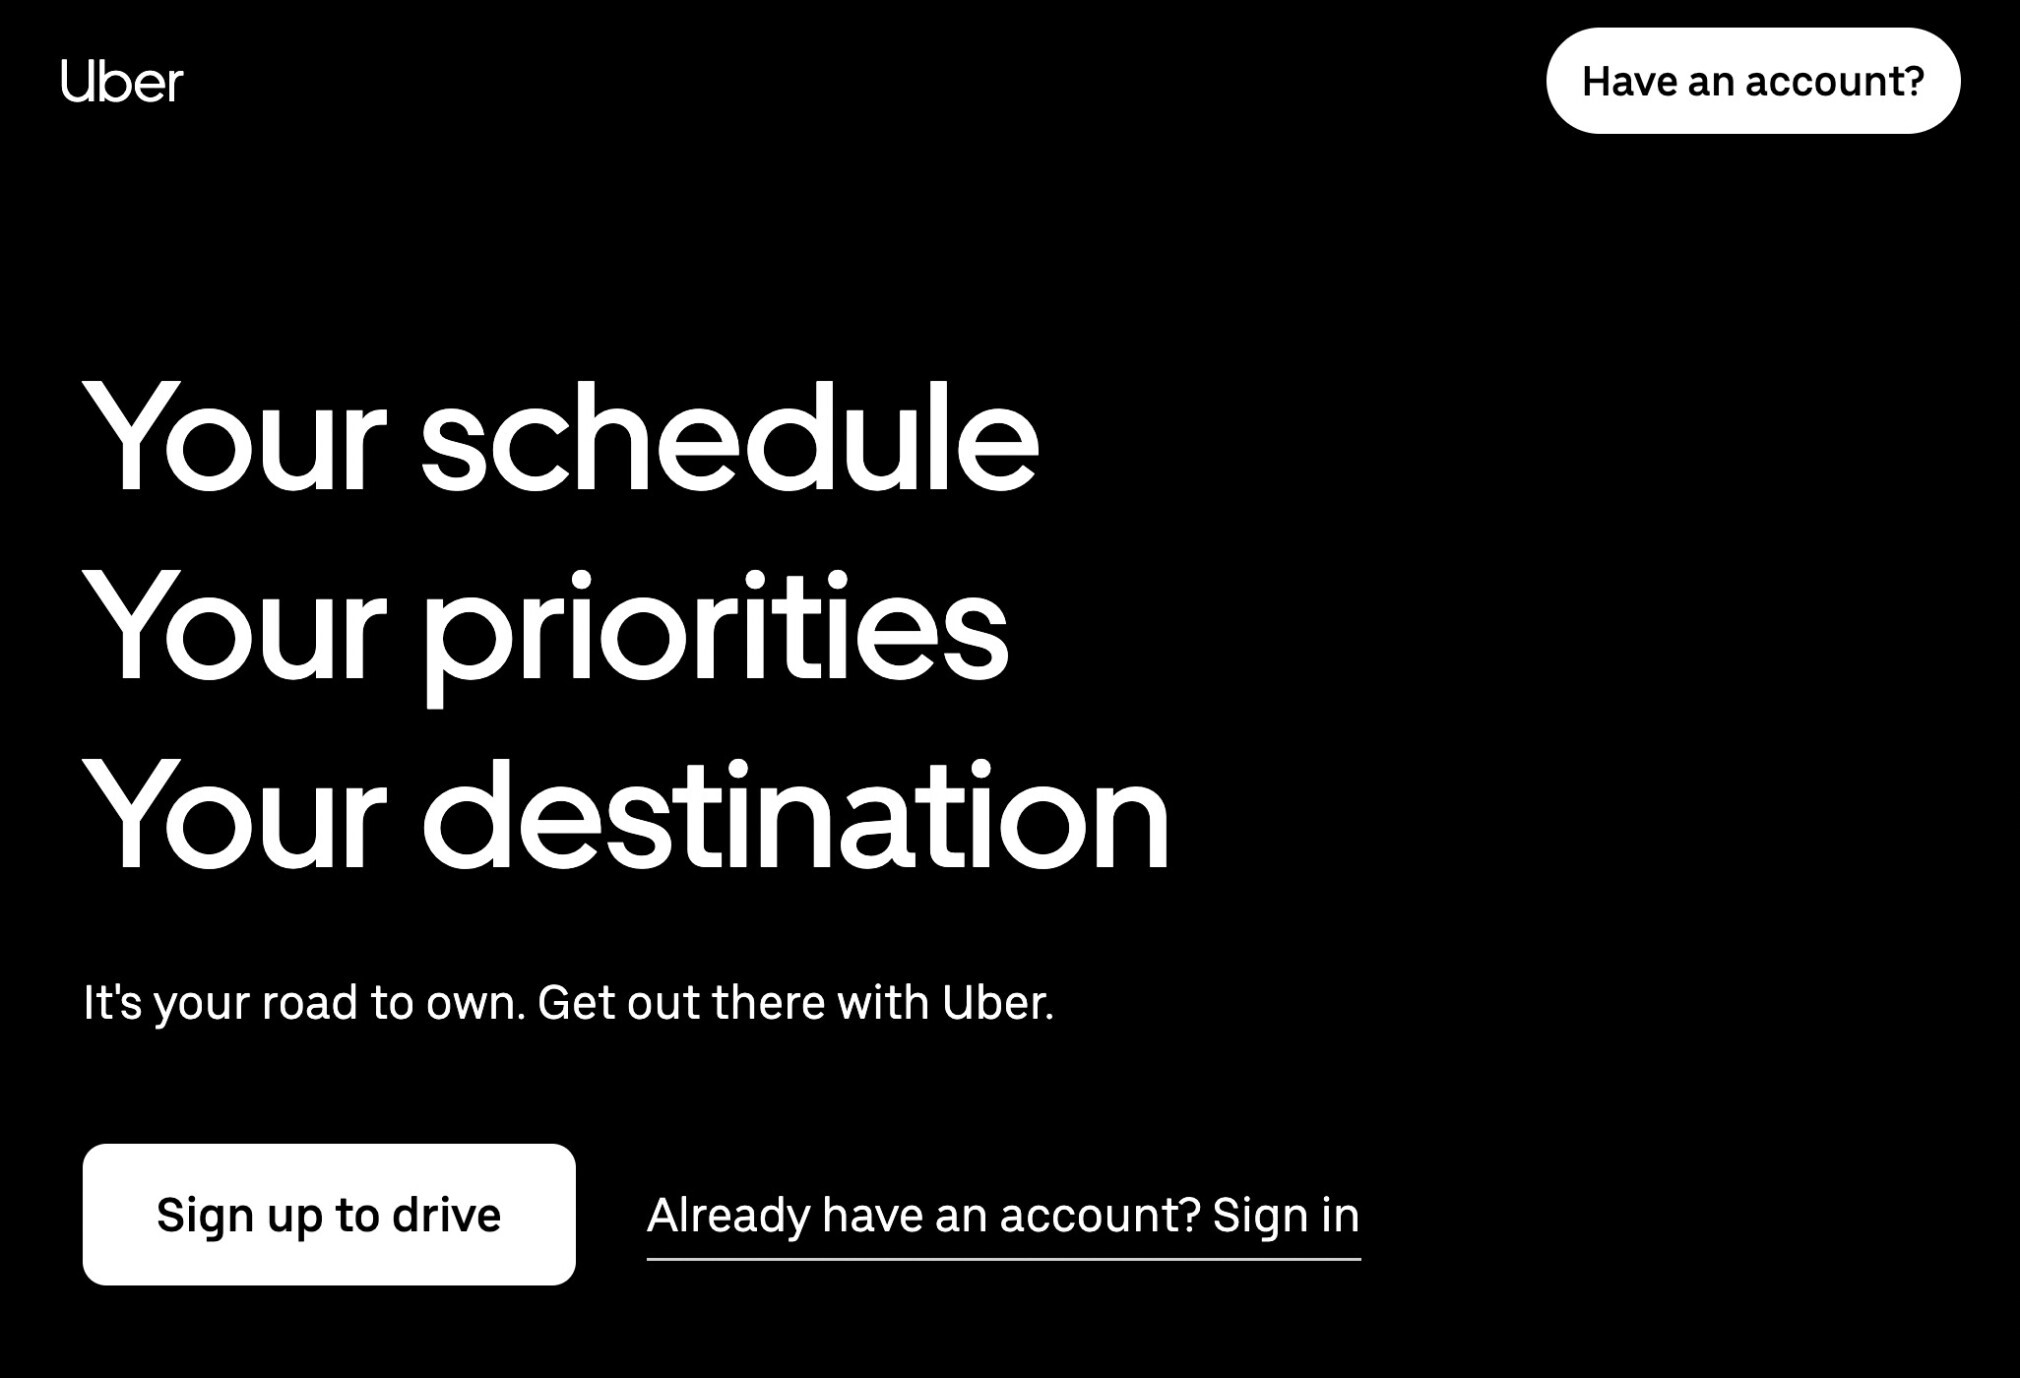 Uber's driver sign up landing page